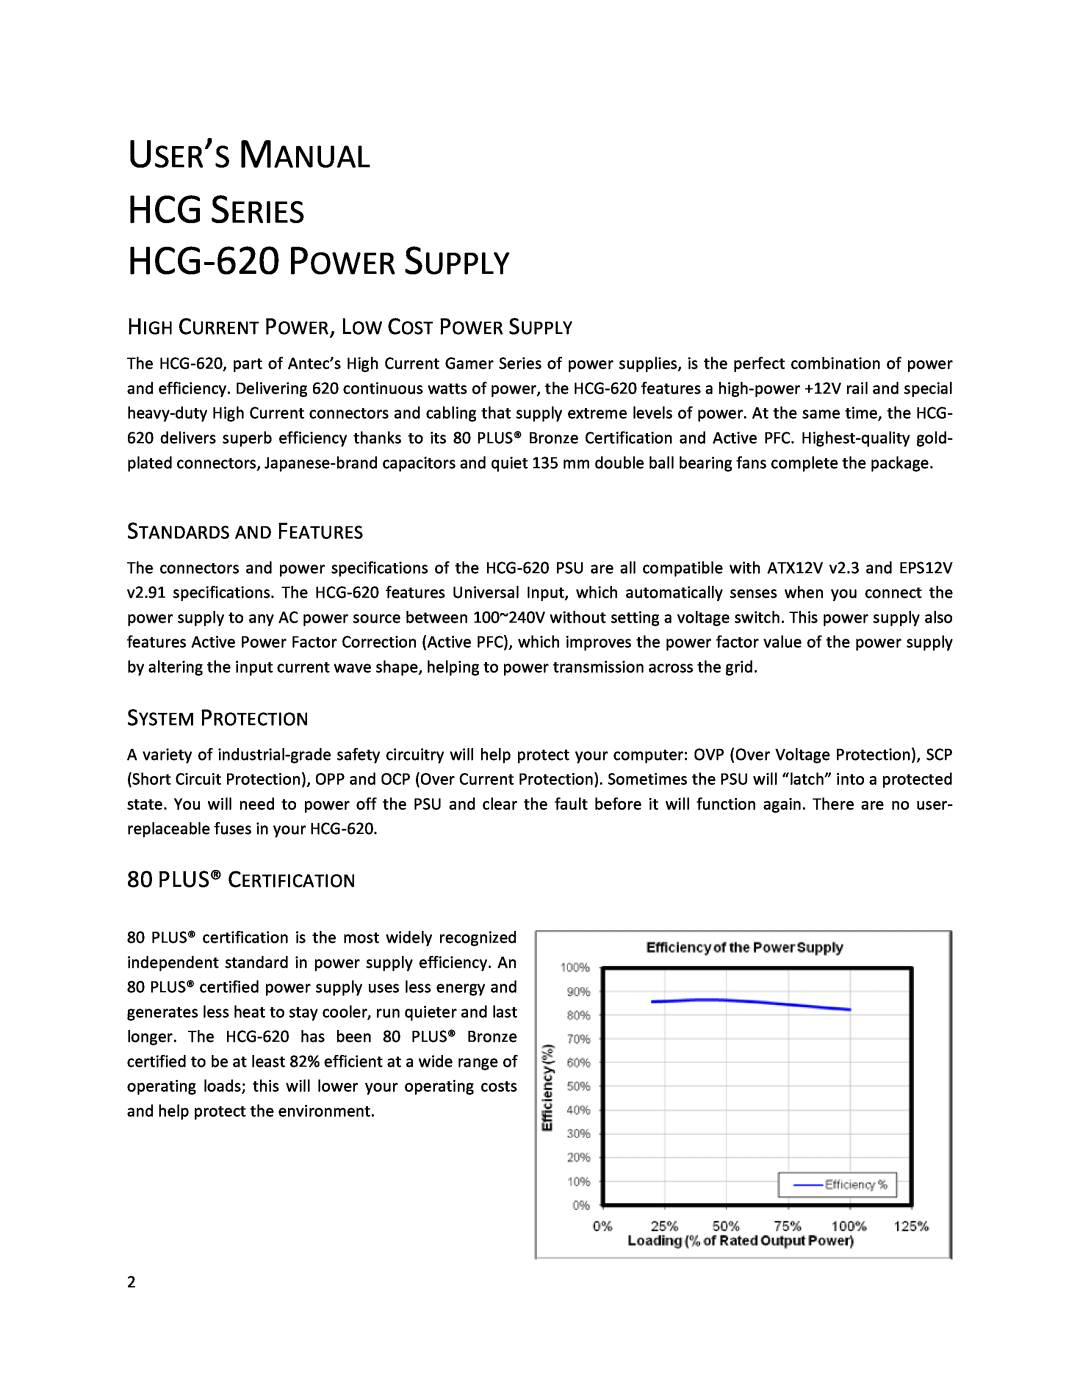 Antec HCG SERIES HCG-620 POWER SUPPLY, High Current Power, Low Cost Power Supply, Standards And Features, User’S Manual 